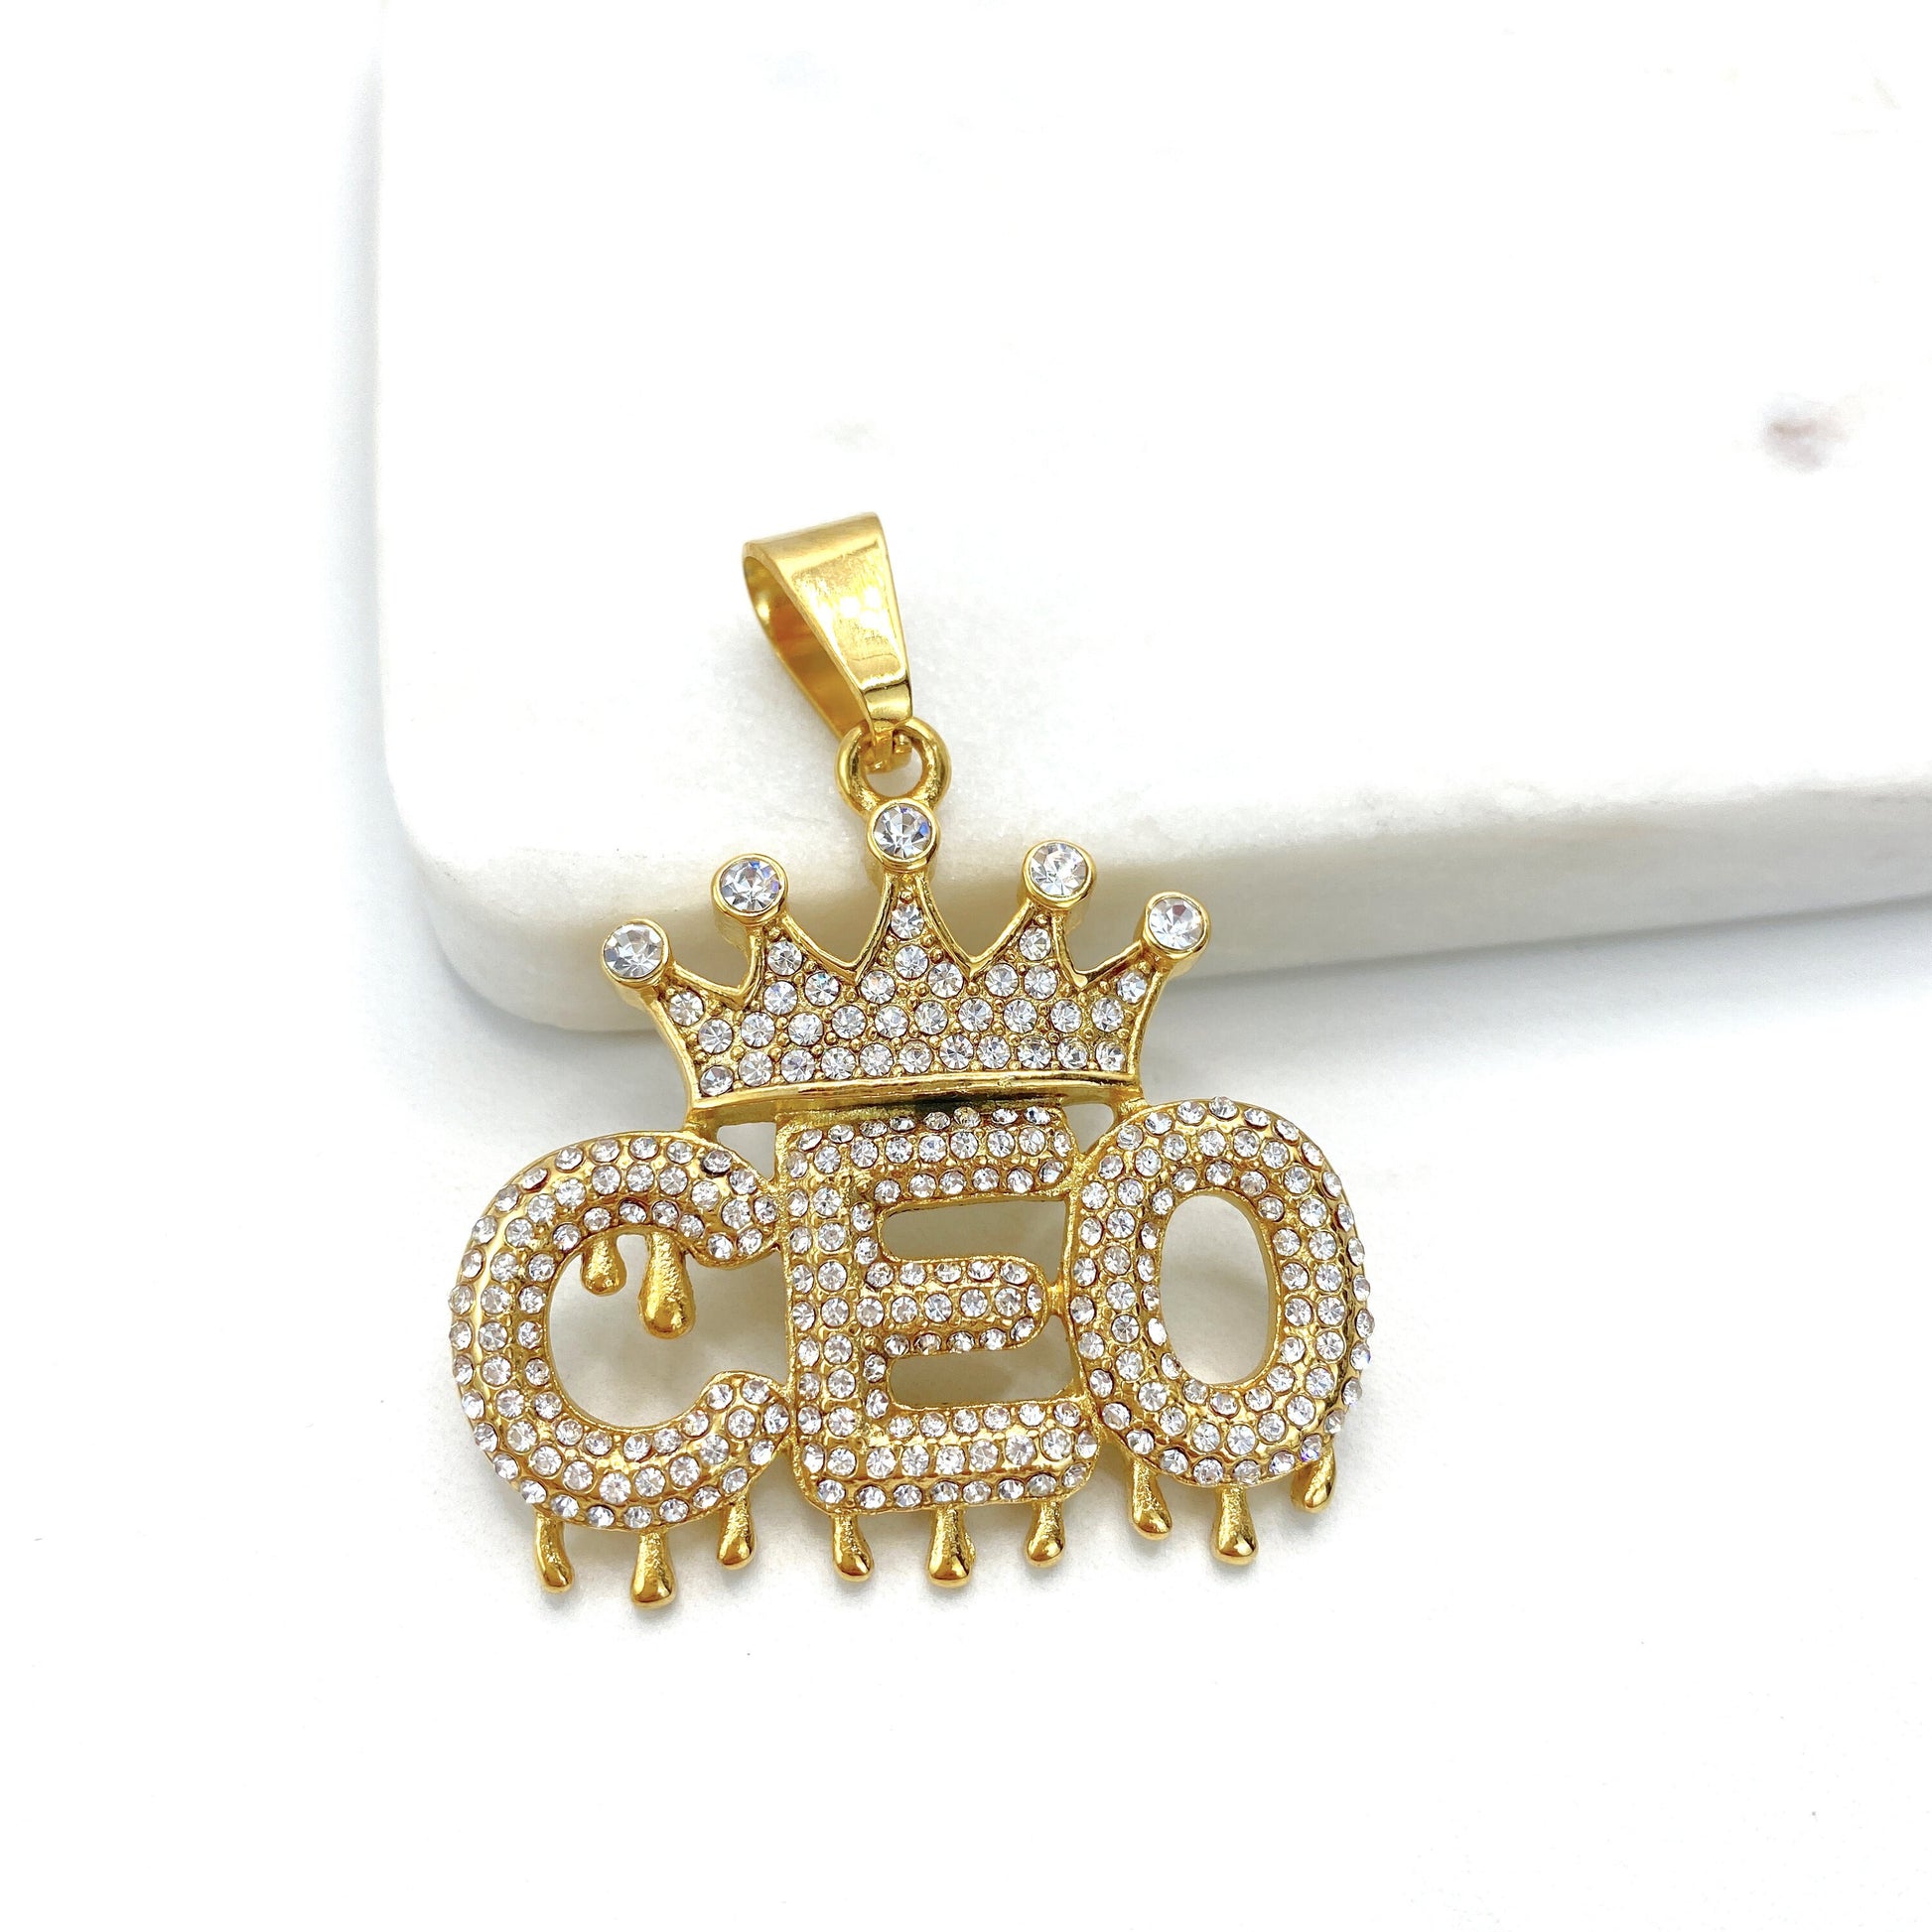 Stainless Steal with Clear Cubic Zirconia ''CEO'' Word Letter Charms Pendant, Gold or Silver, Wholesale Jewelry Making Supplies